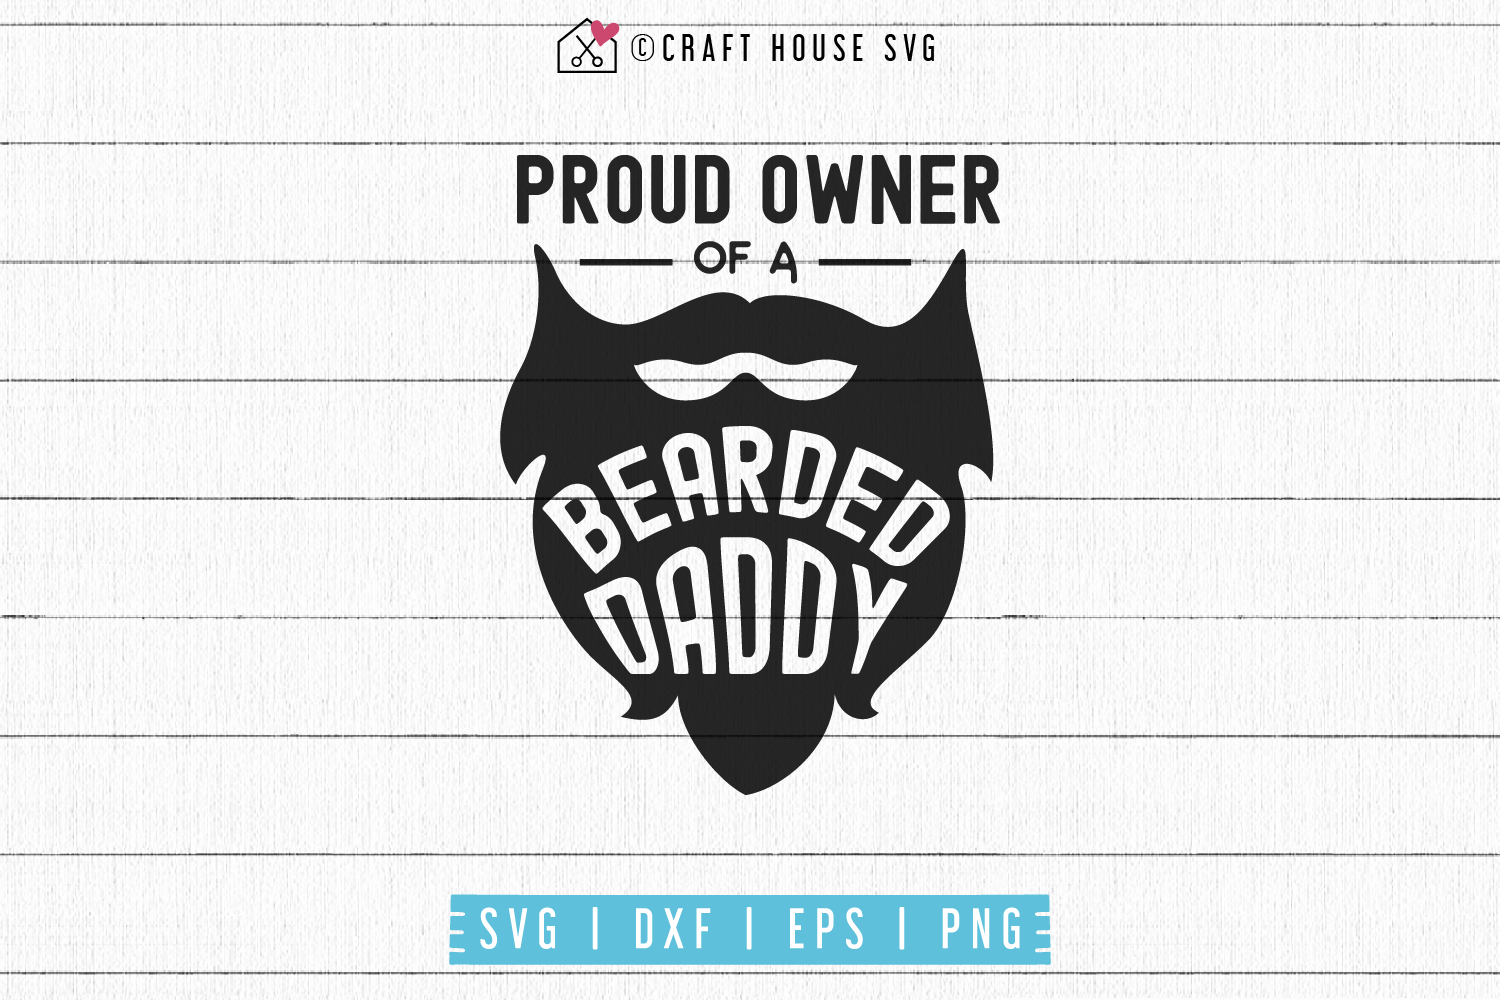 Proud owner of a bearded daddy SVG | M53F Craft House SVG - SVG files for Cricut and Silhouette